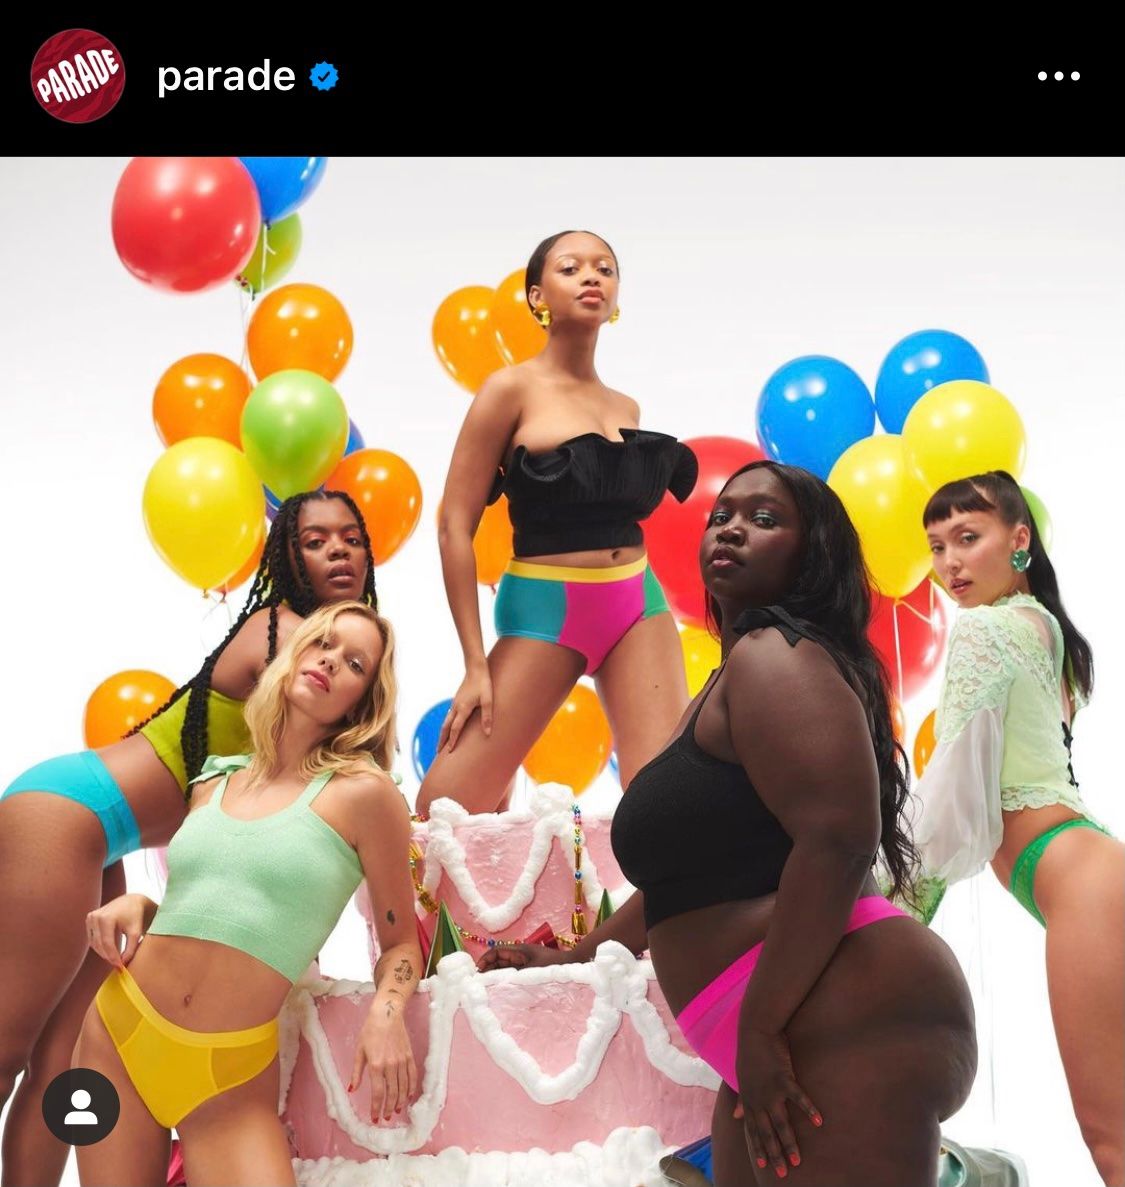 Late to the Parade: The Self-Own of Influencer Marketing in 2021